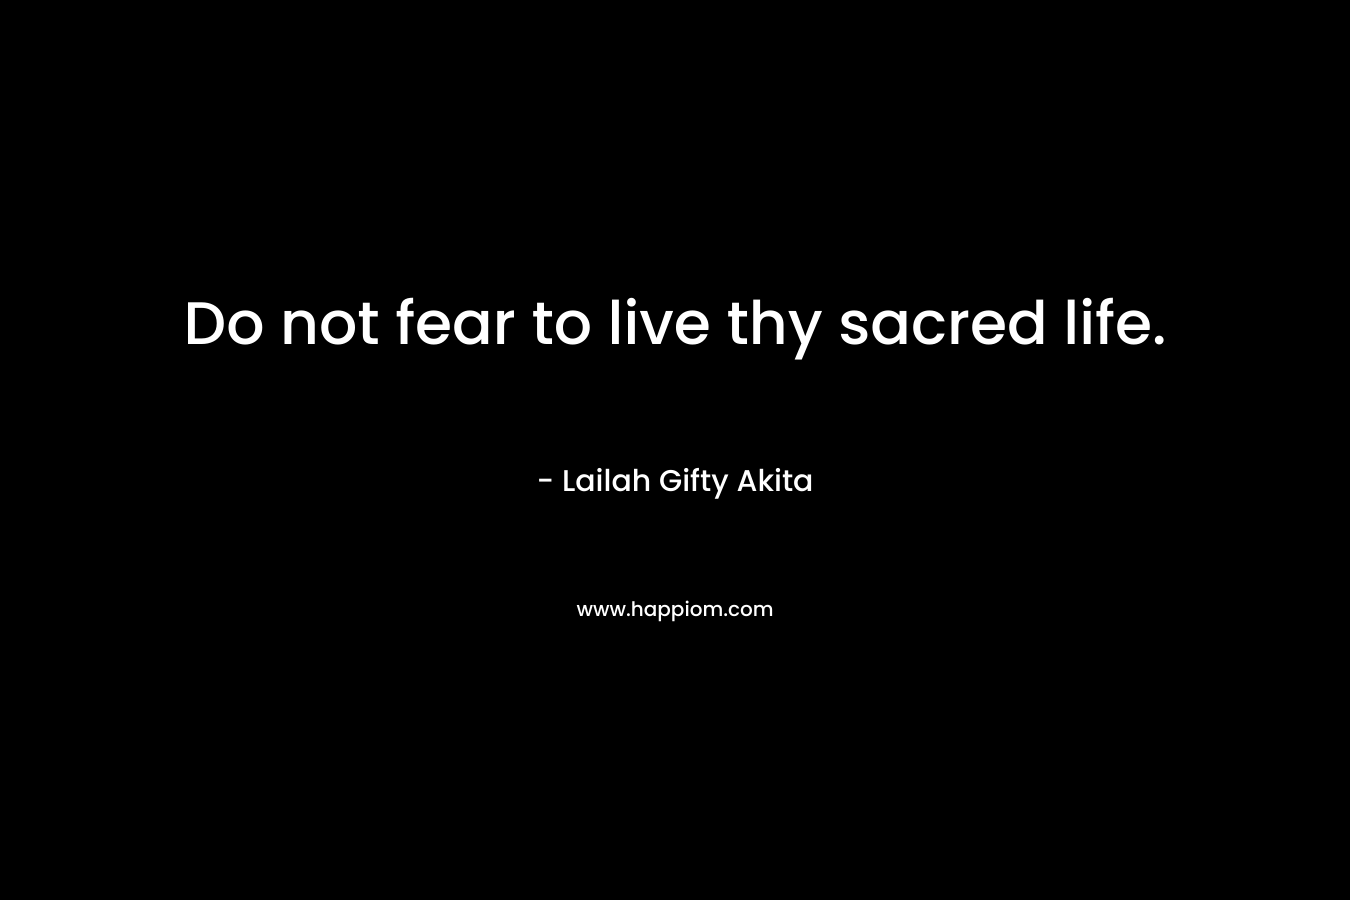 Do not fear to live thy sacred life.